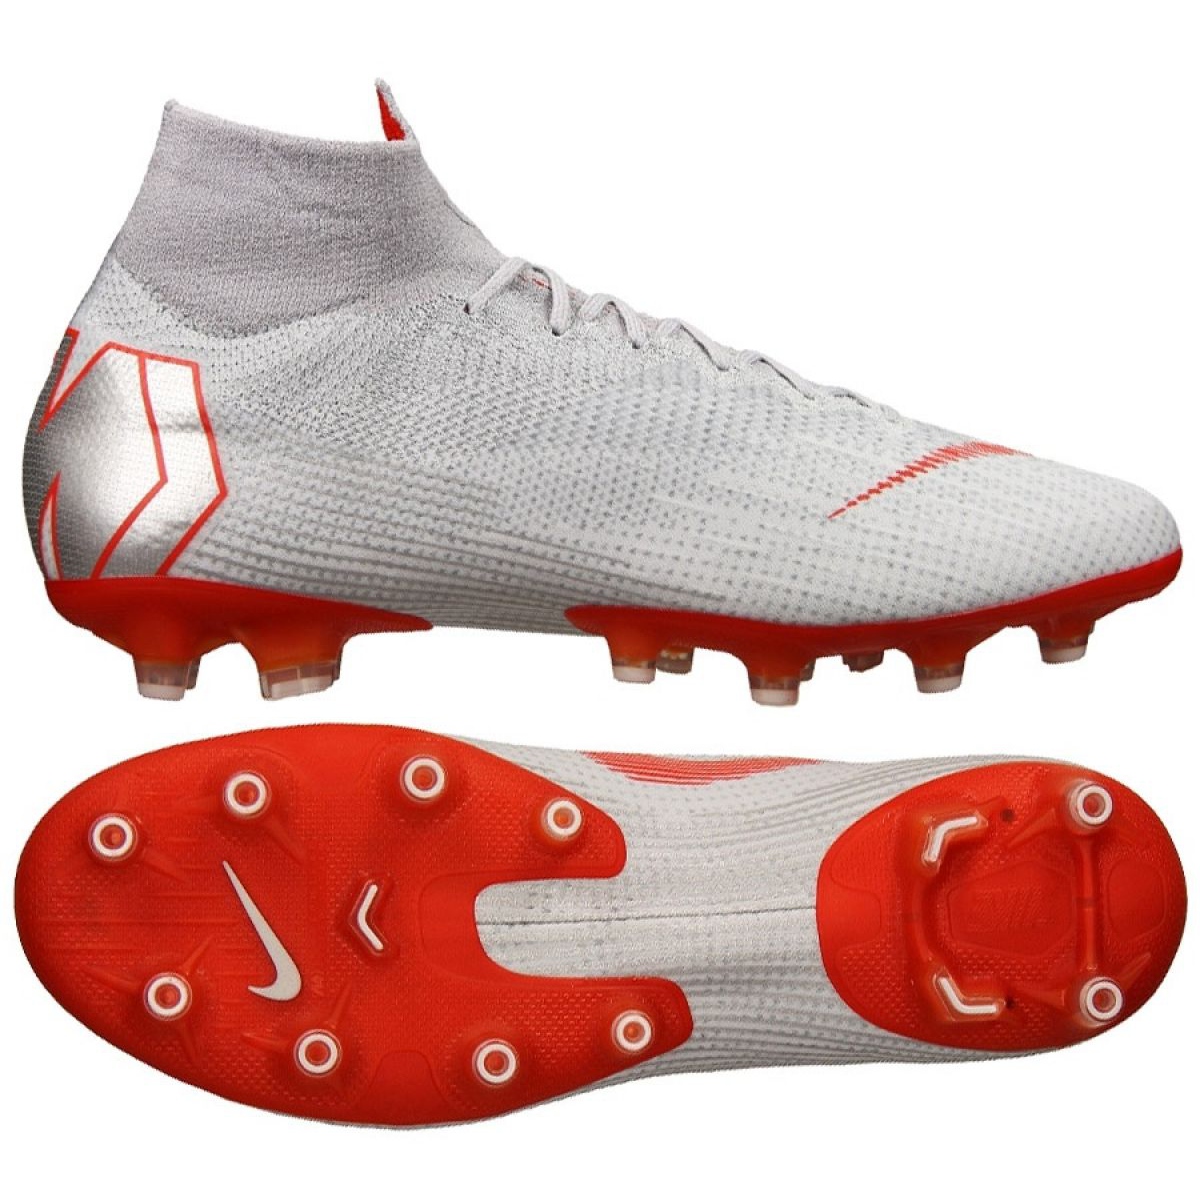 Superfly Mercurial Nuove FgCucine Bulthaup Nike Milano